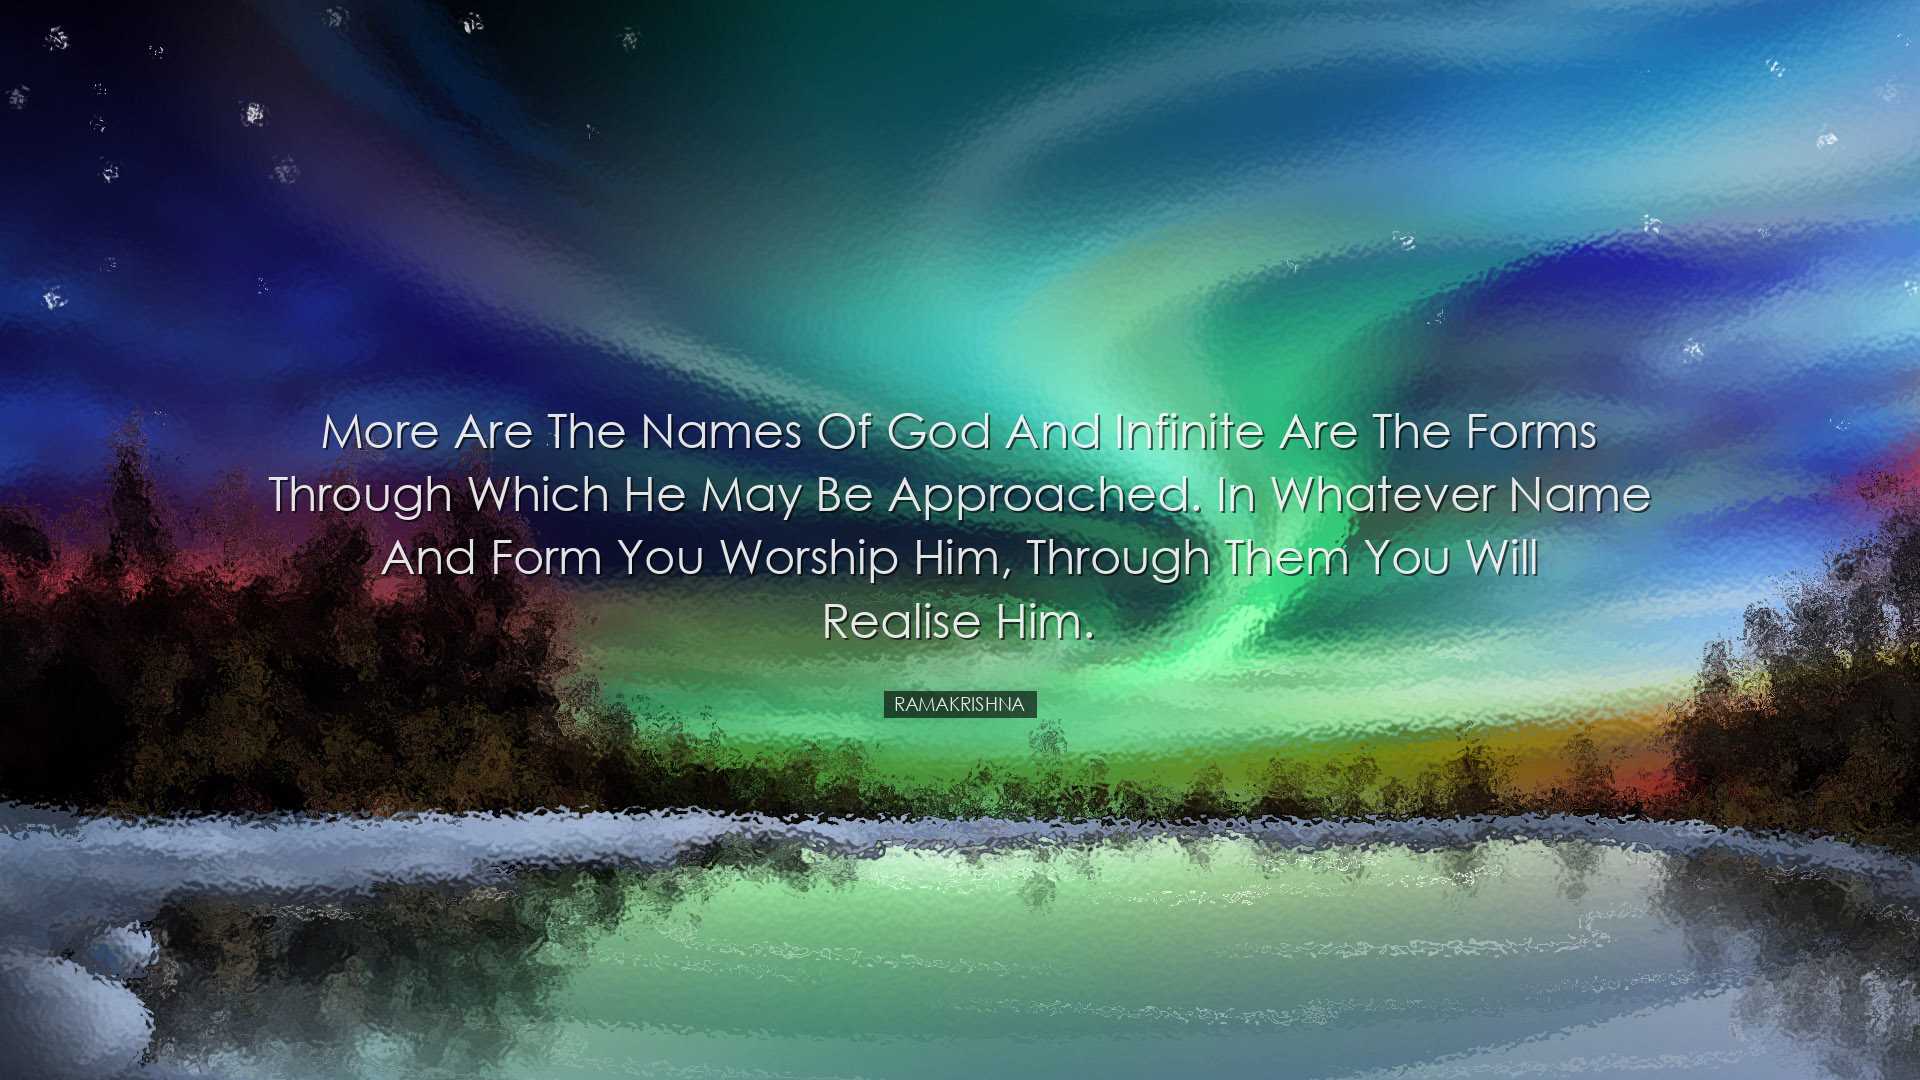 More are the names of God and infinite are the forms through which